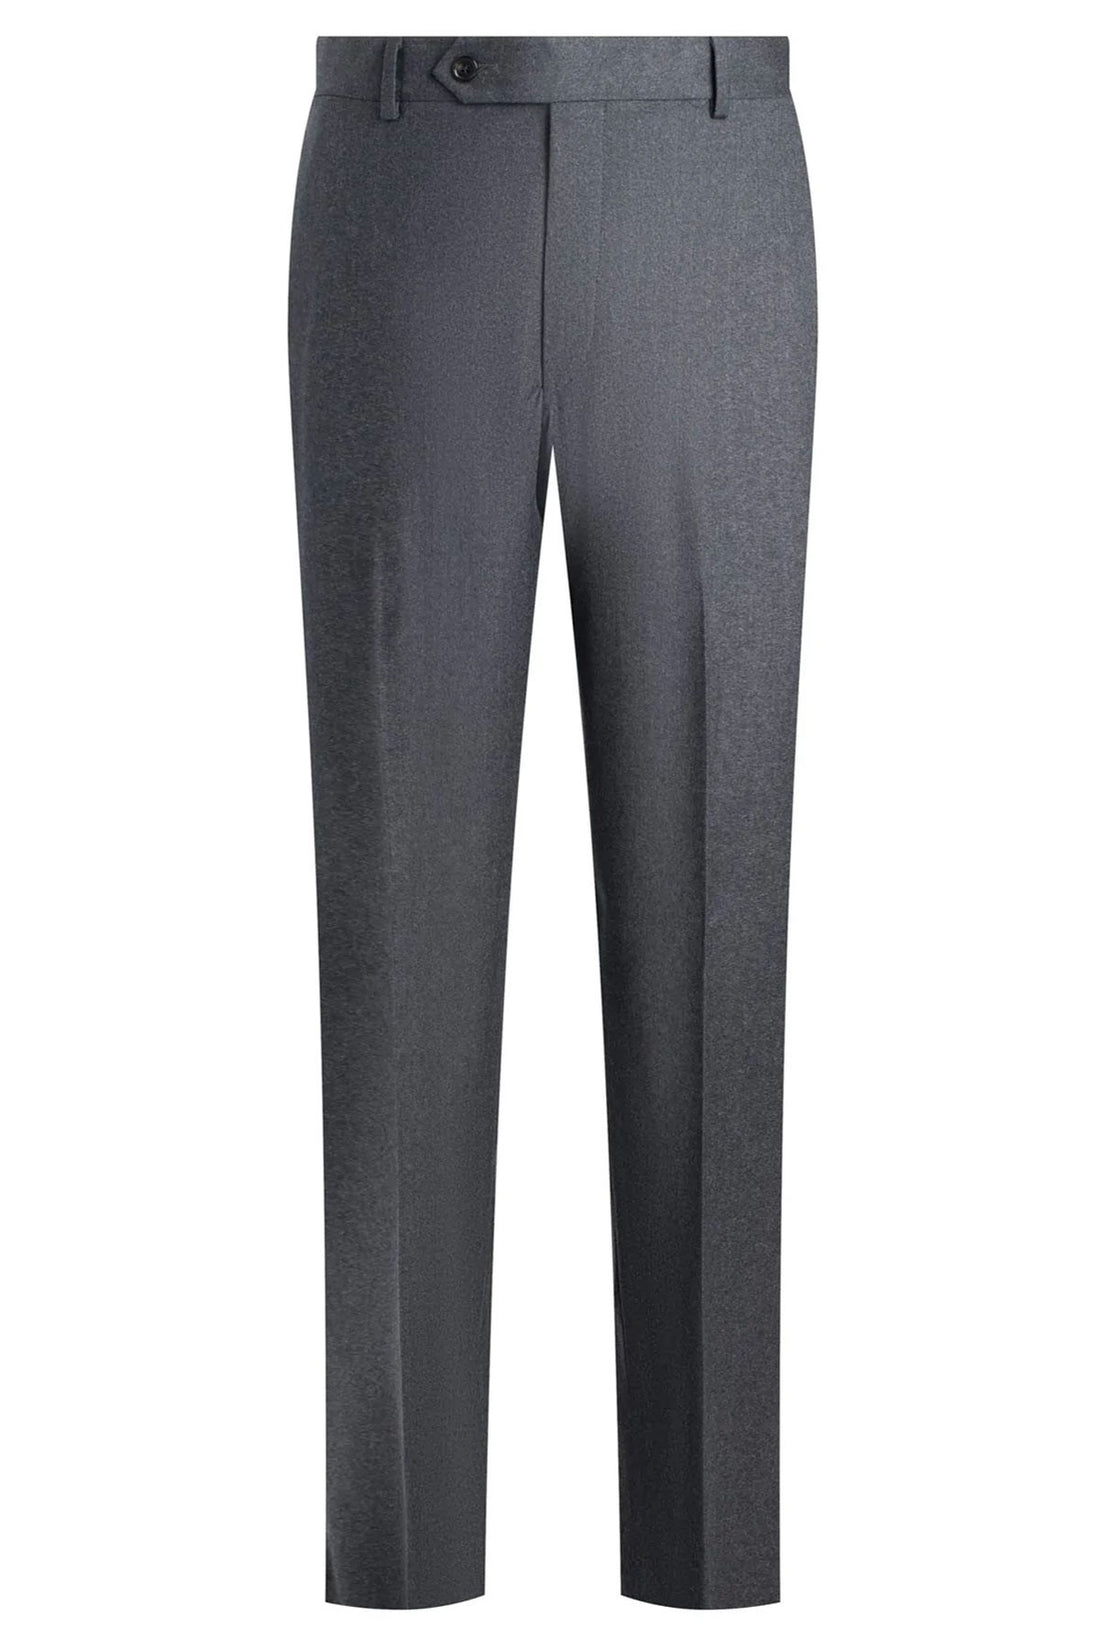 Grey Ice Flannel Flat Front Trousers